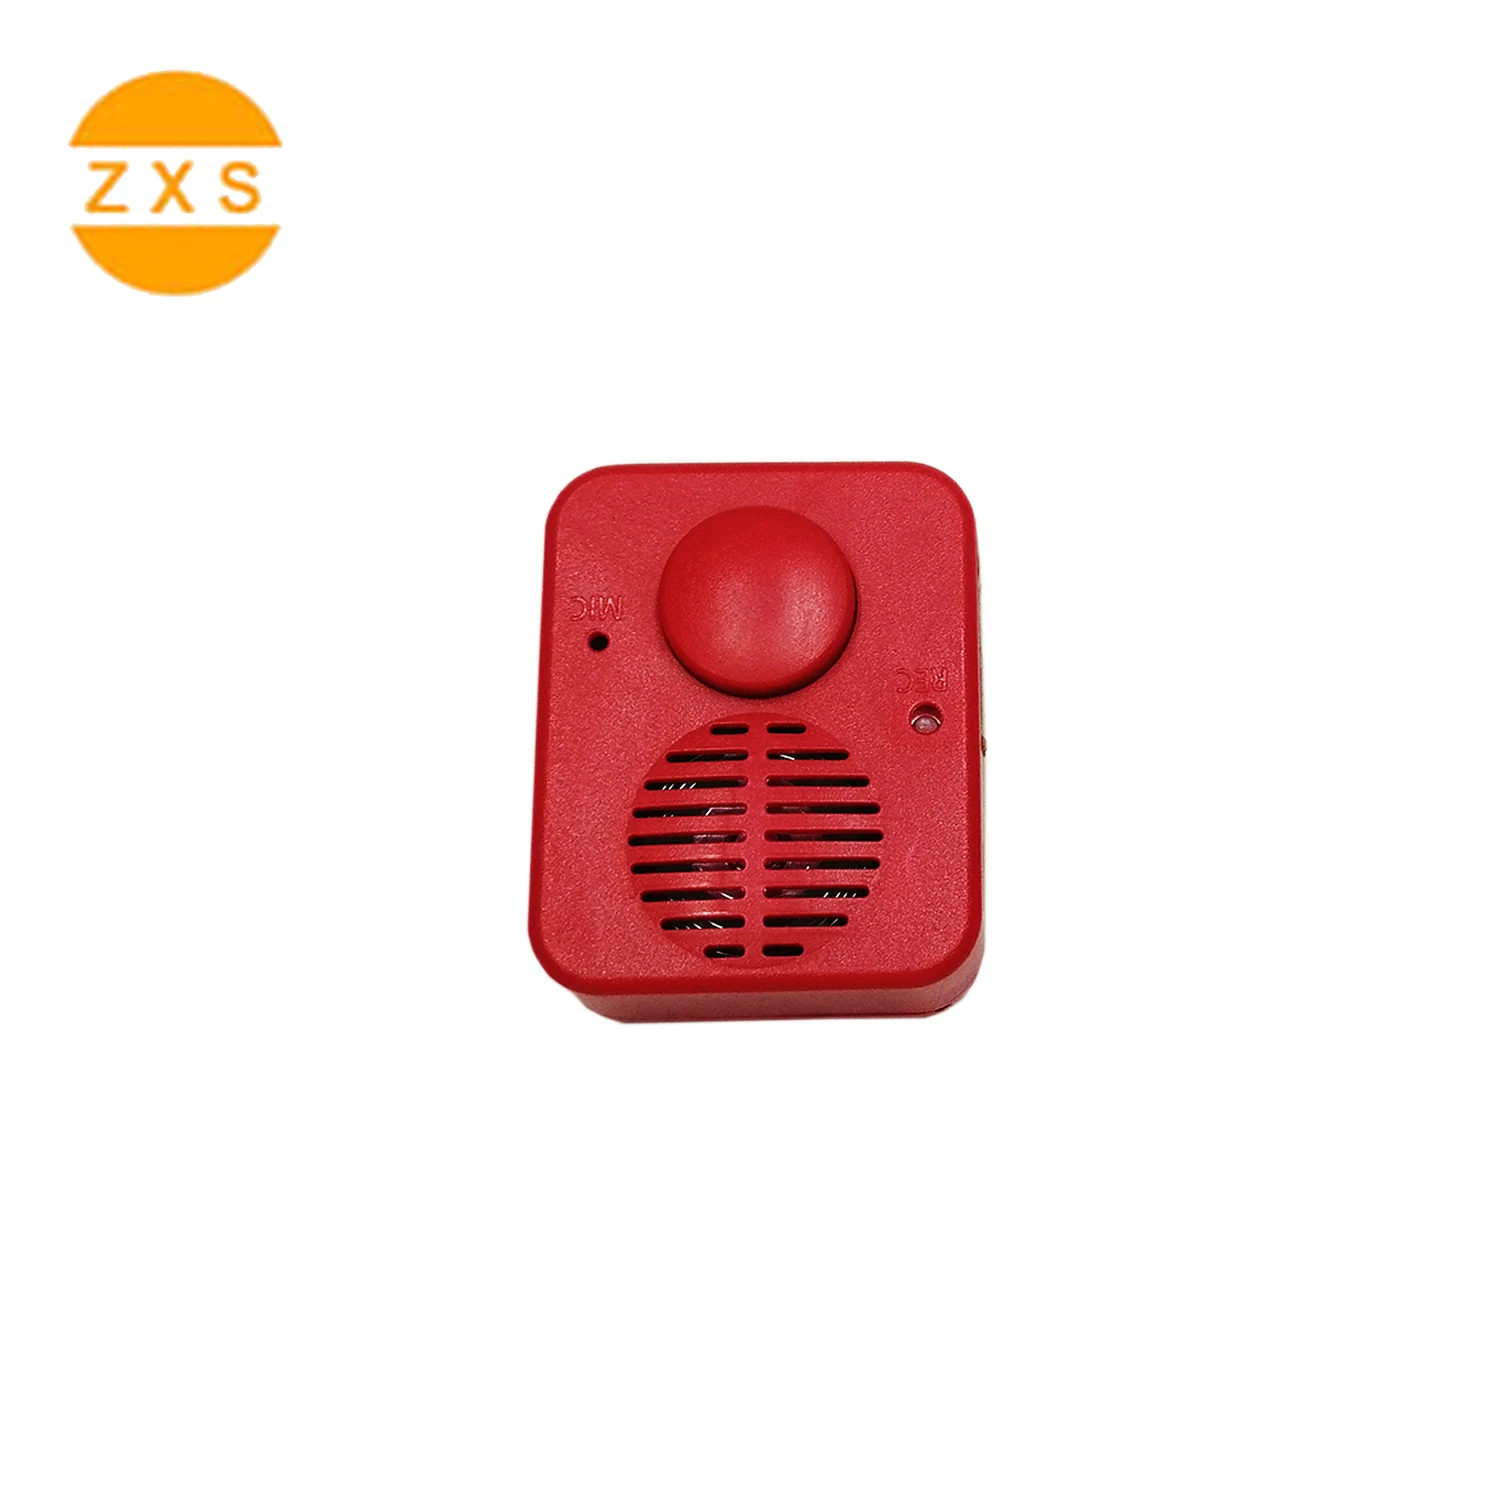 
2020 Programmable small usb sound voice music recording chip box device module for plush toys Hot sale products  (1282997206)